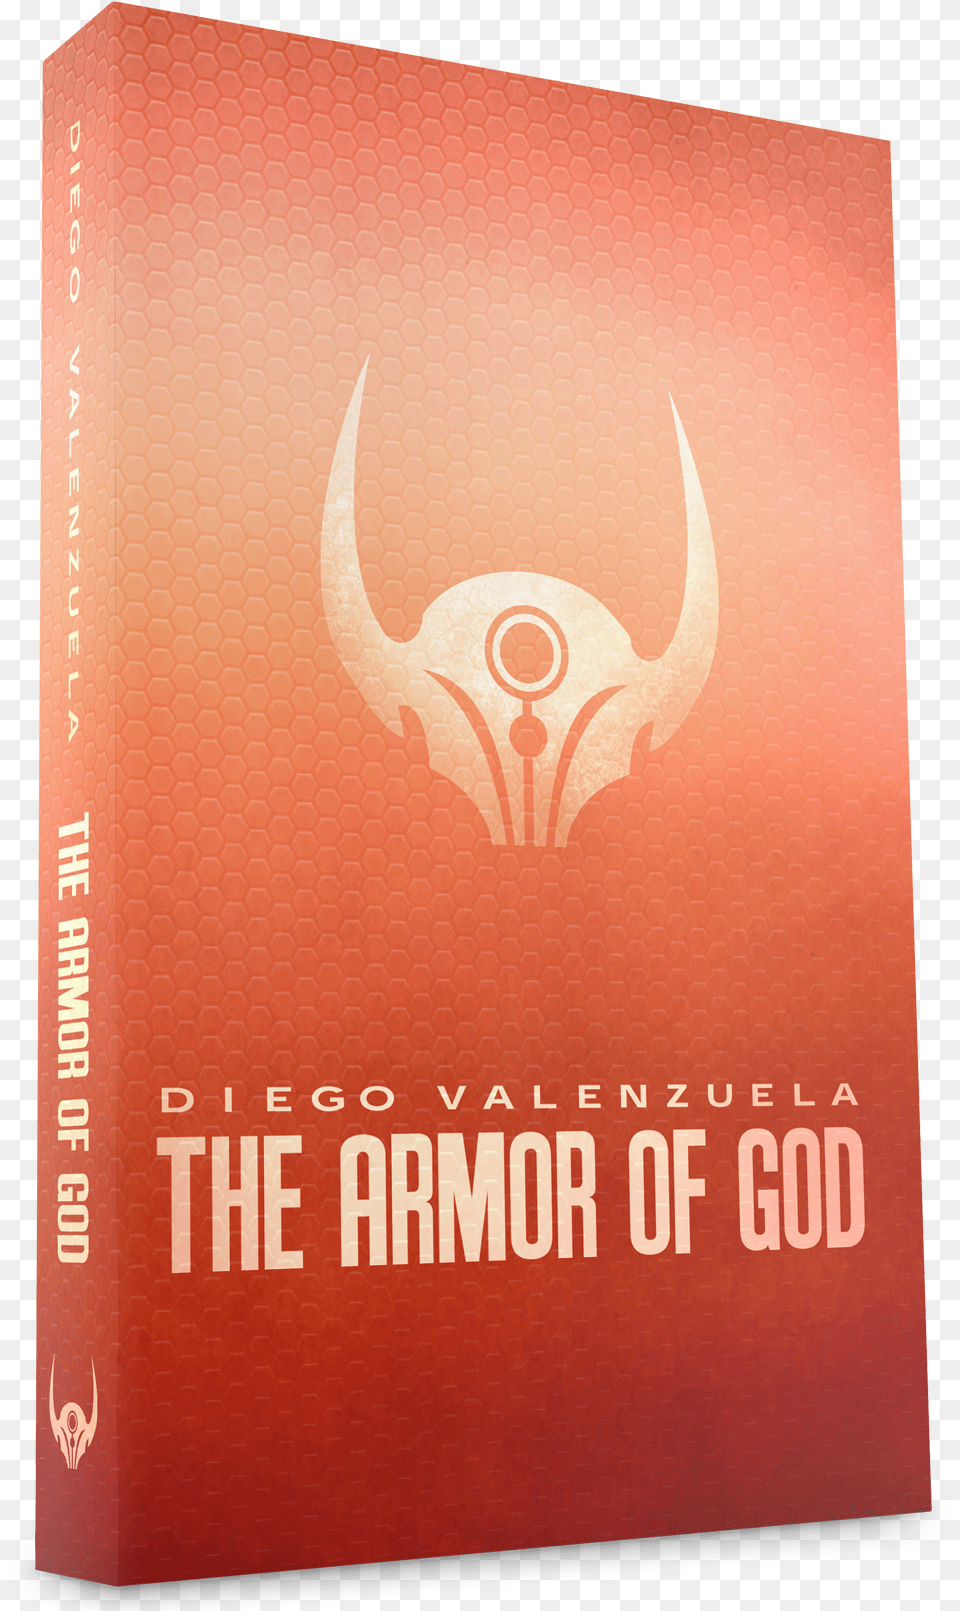 Books Armor Of God Book, Publication, Advertisement Png Image